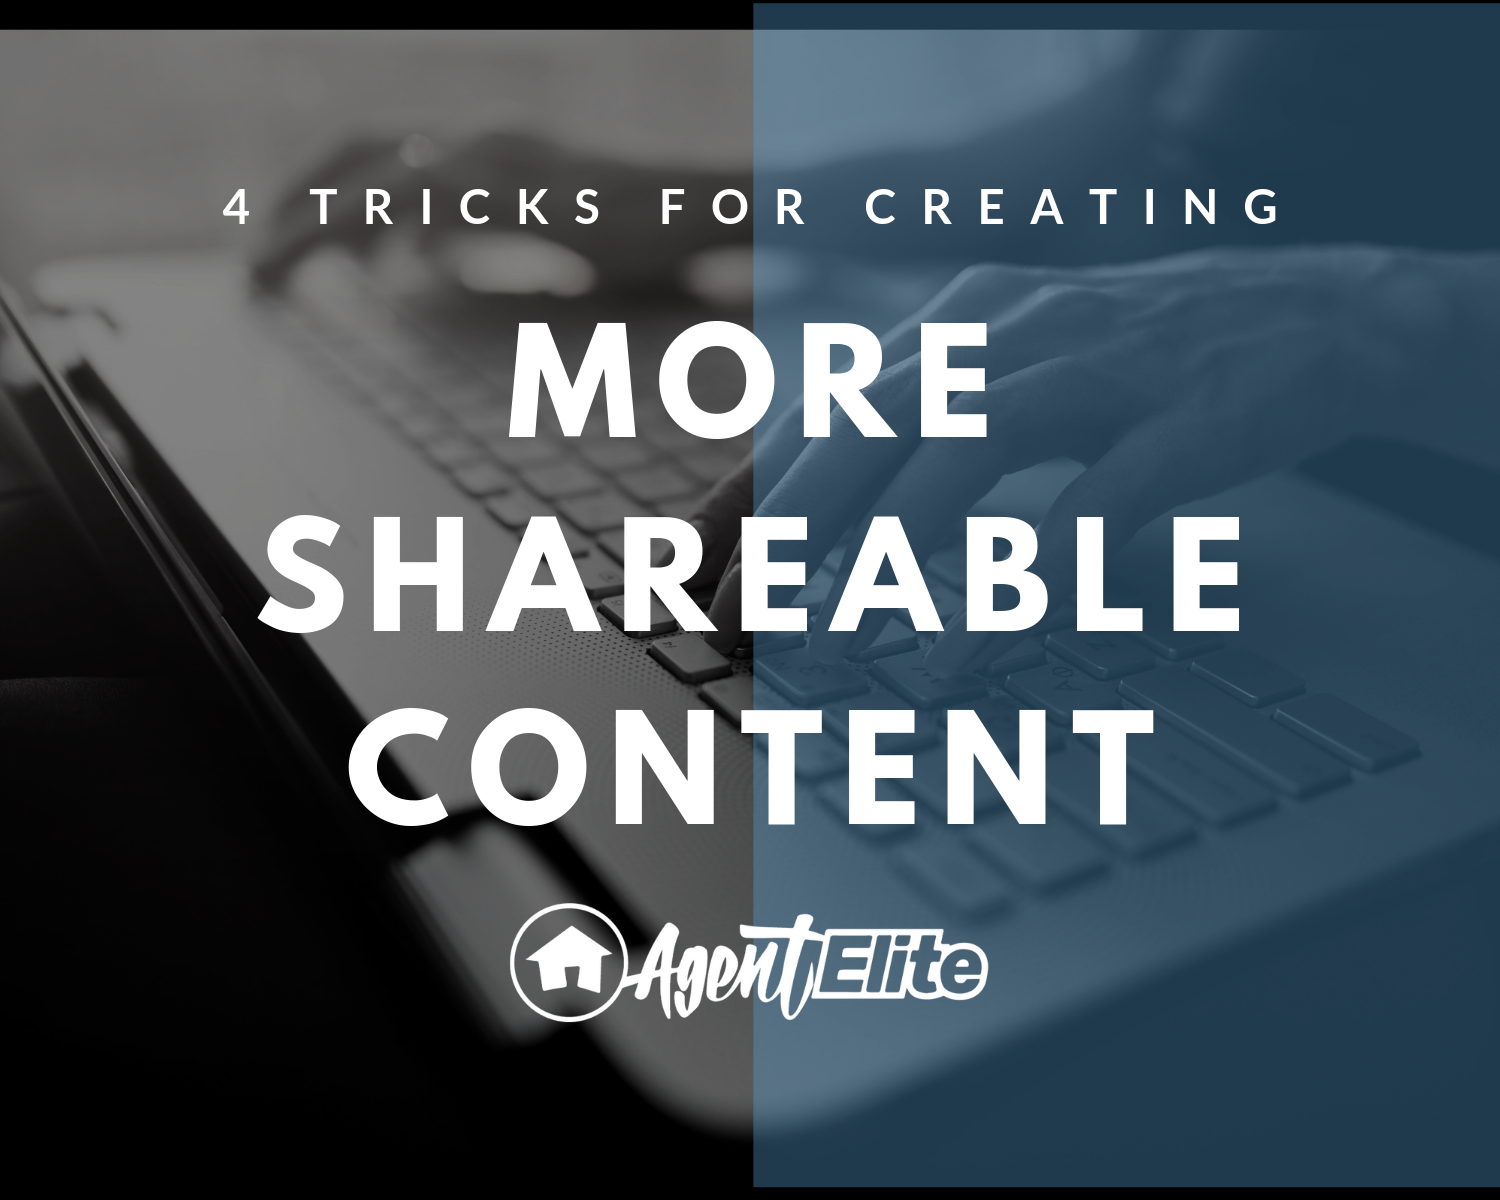 4 Tricks For Creating More Shareable Content